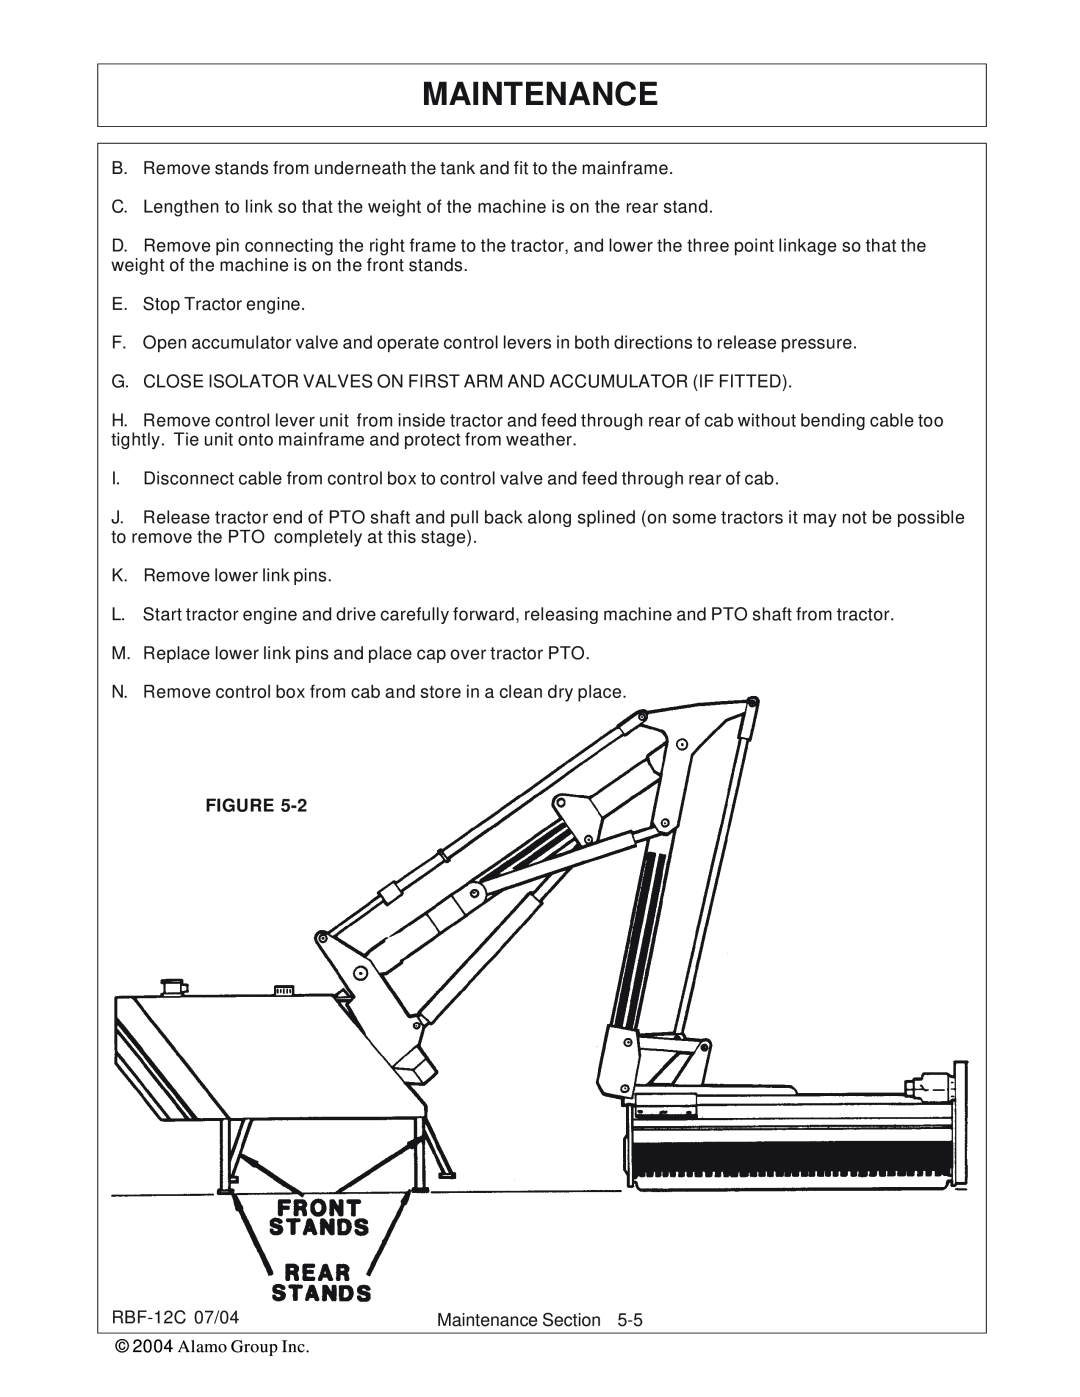 Tiger Products Co., Ltd RBF-12C manual Maintenance, E.Stop Tractor engine, Figure 